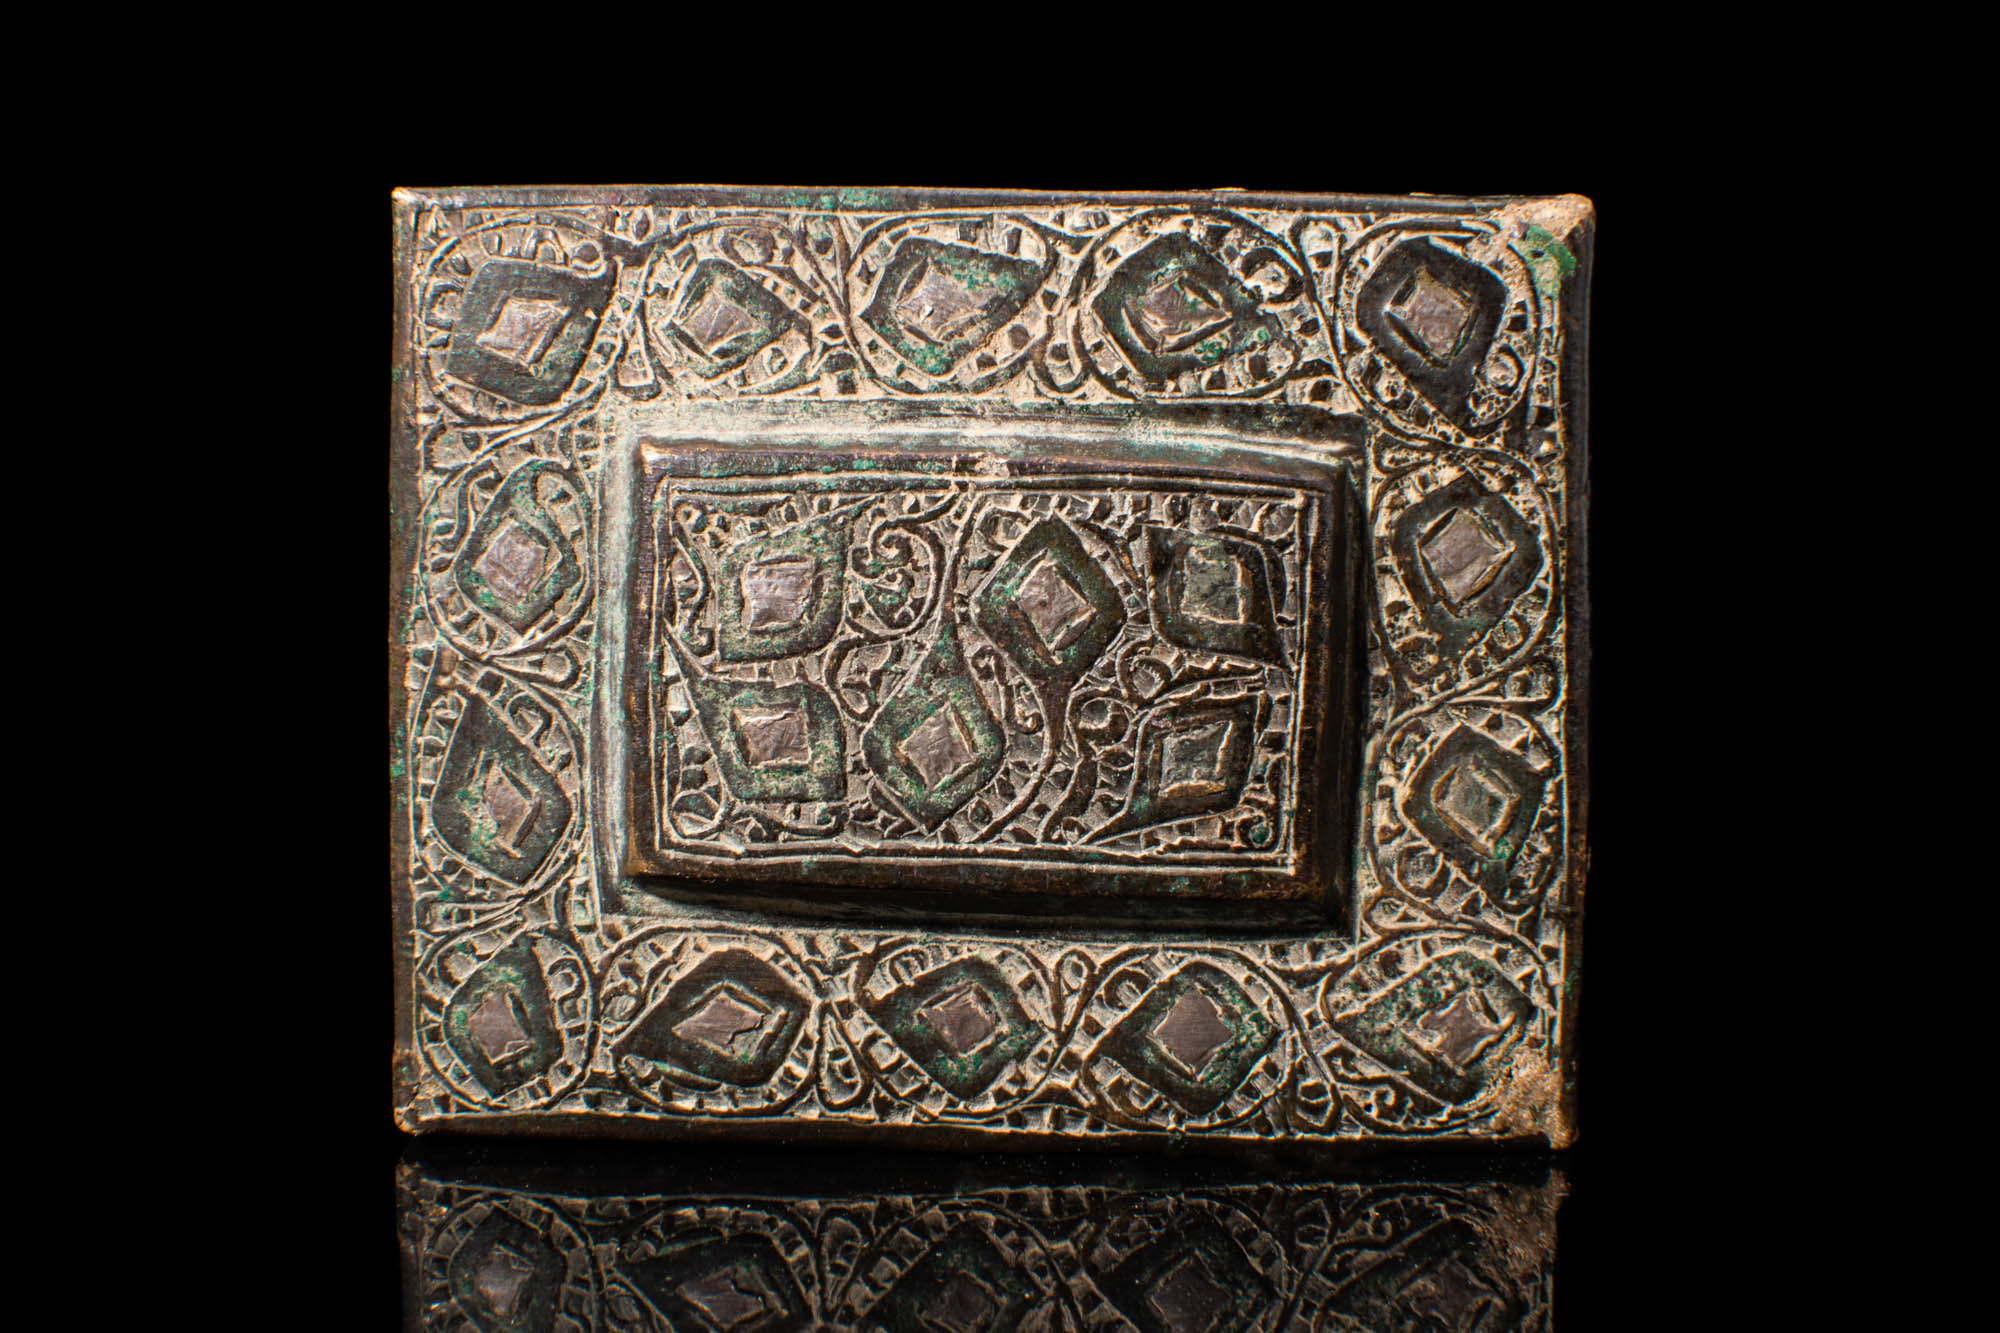 SAFAVID BOX COVER DECORATED WITH FLORAL MOTIFS